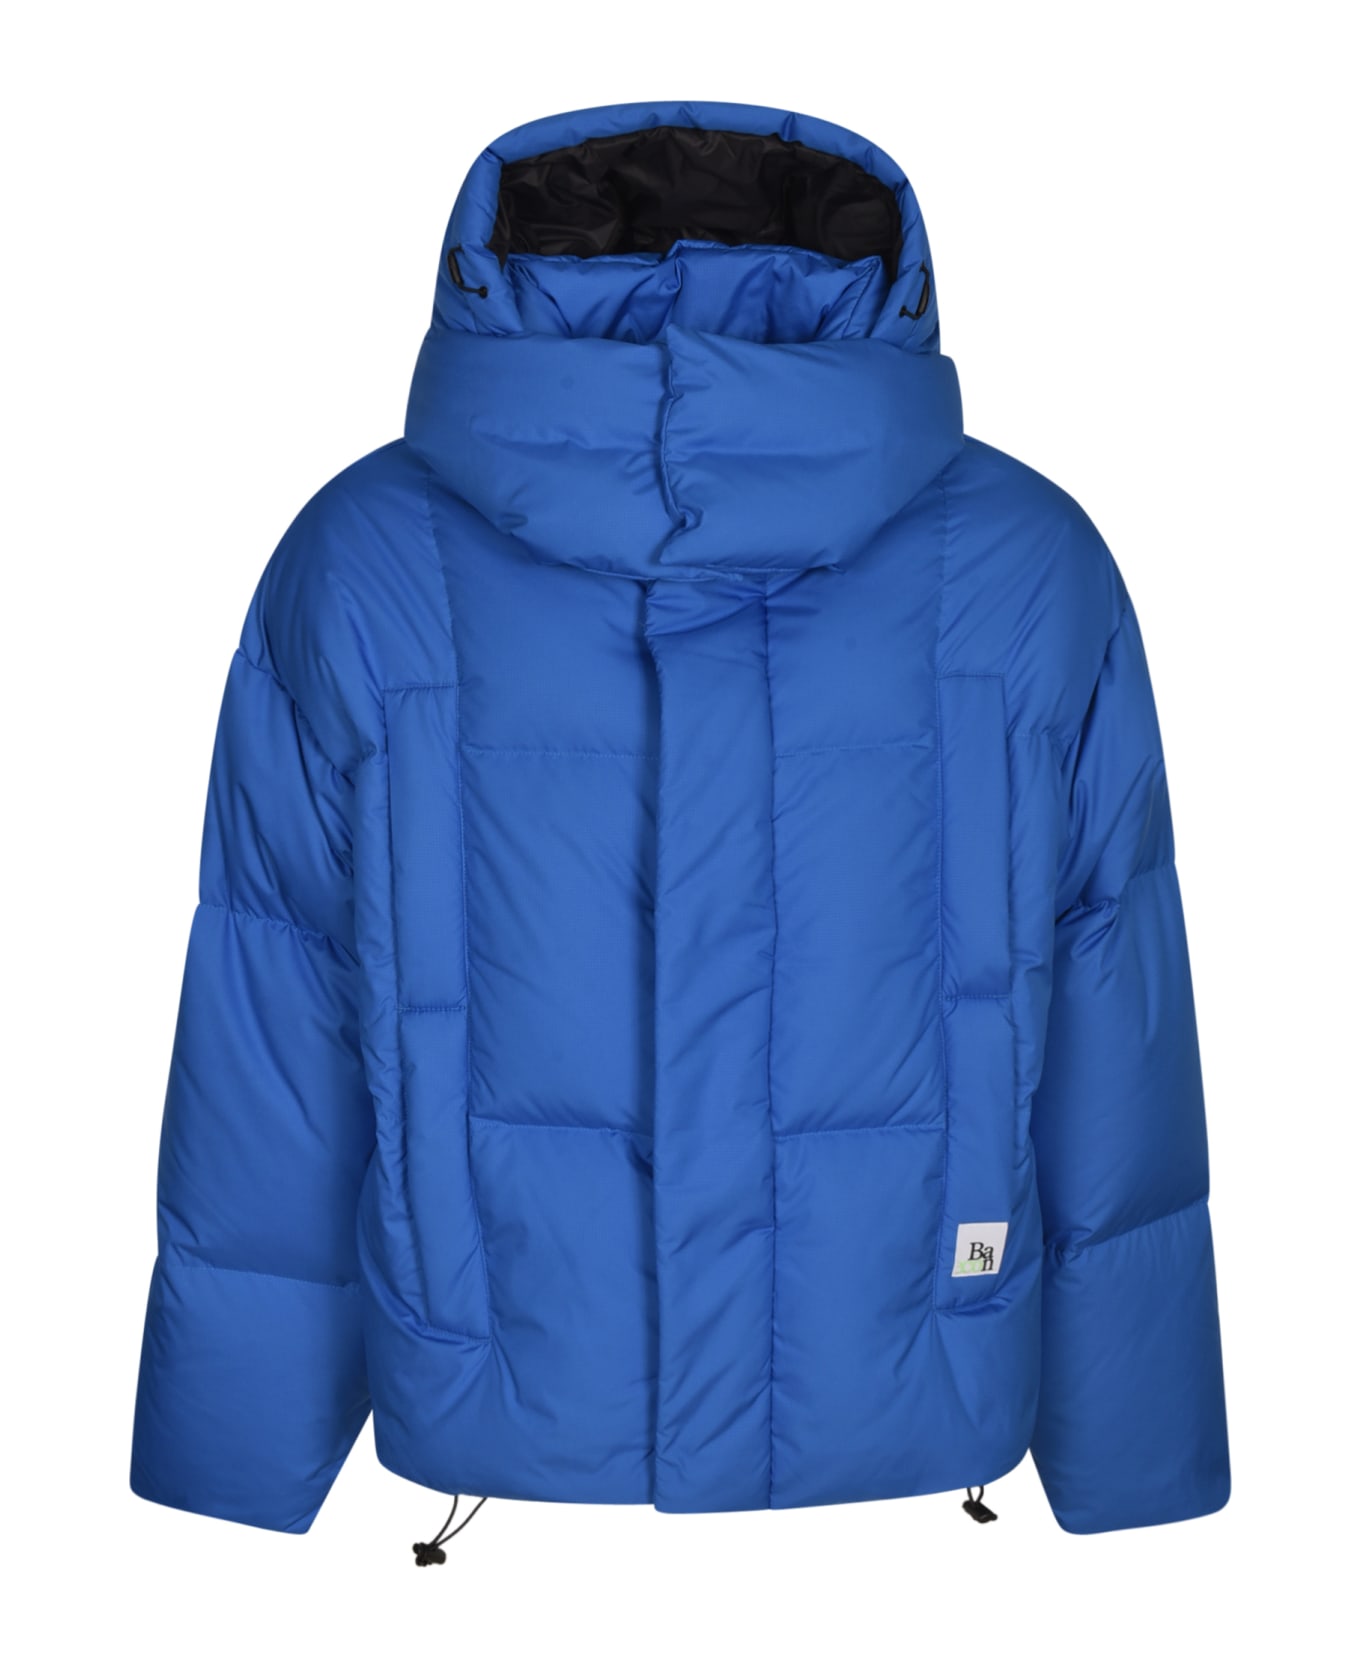 Bacon M Andrew Eco Rip Padded Jacket - Klein